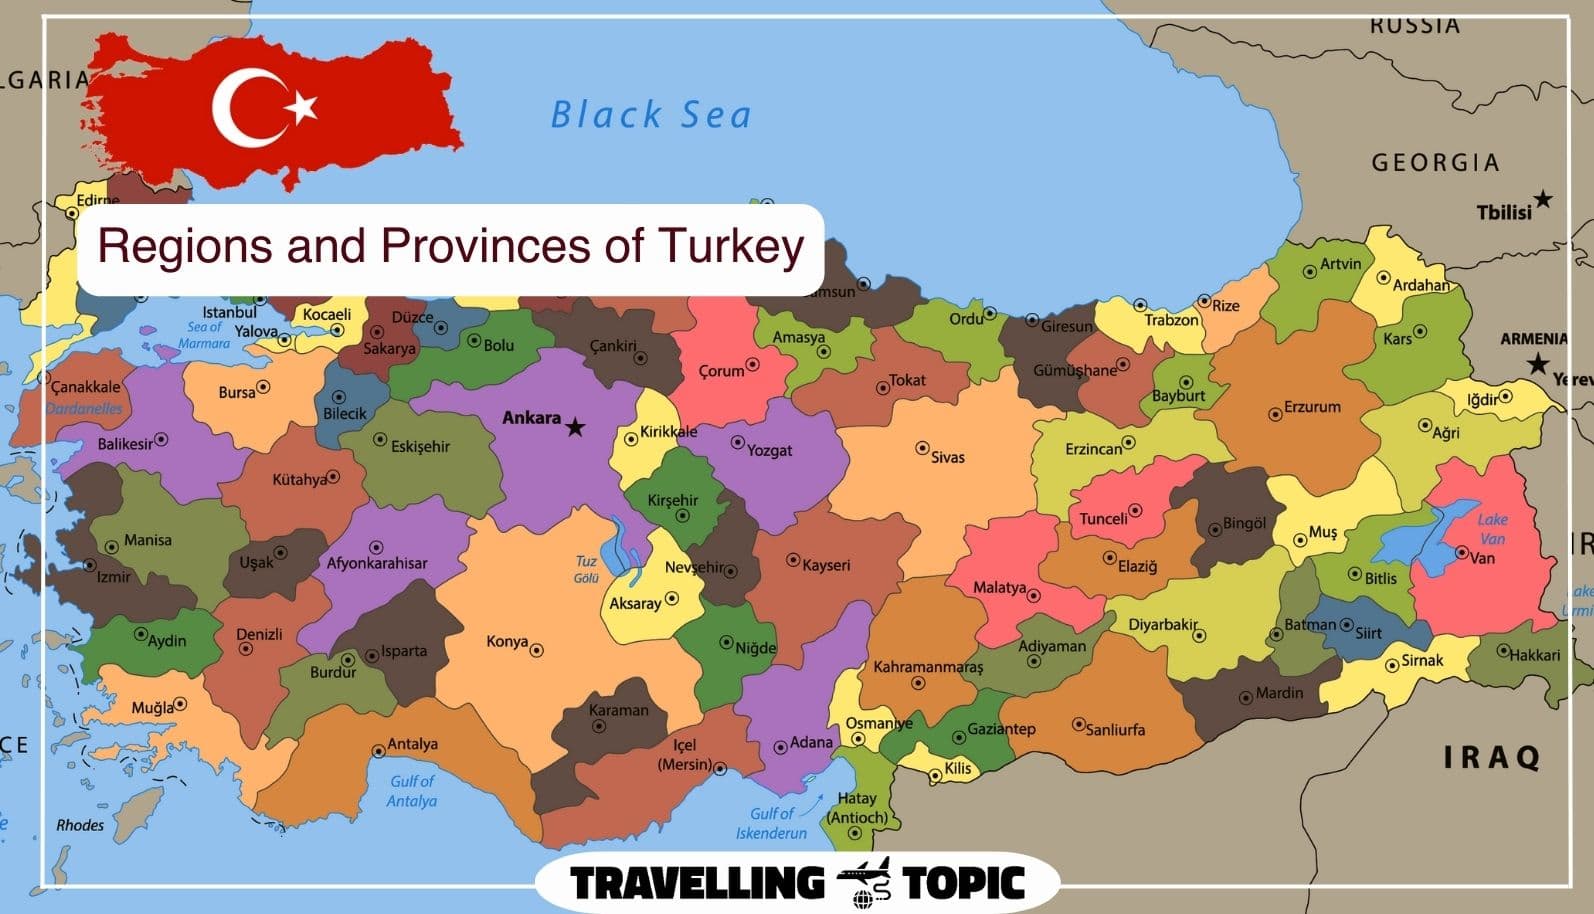 Regions and Provinces of Turkey